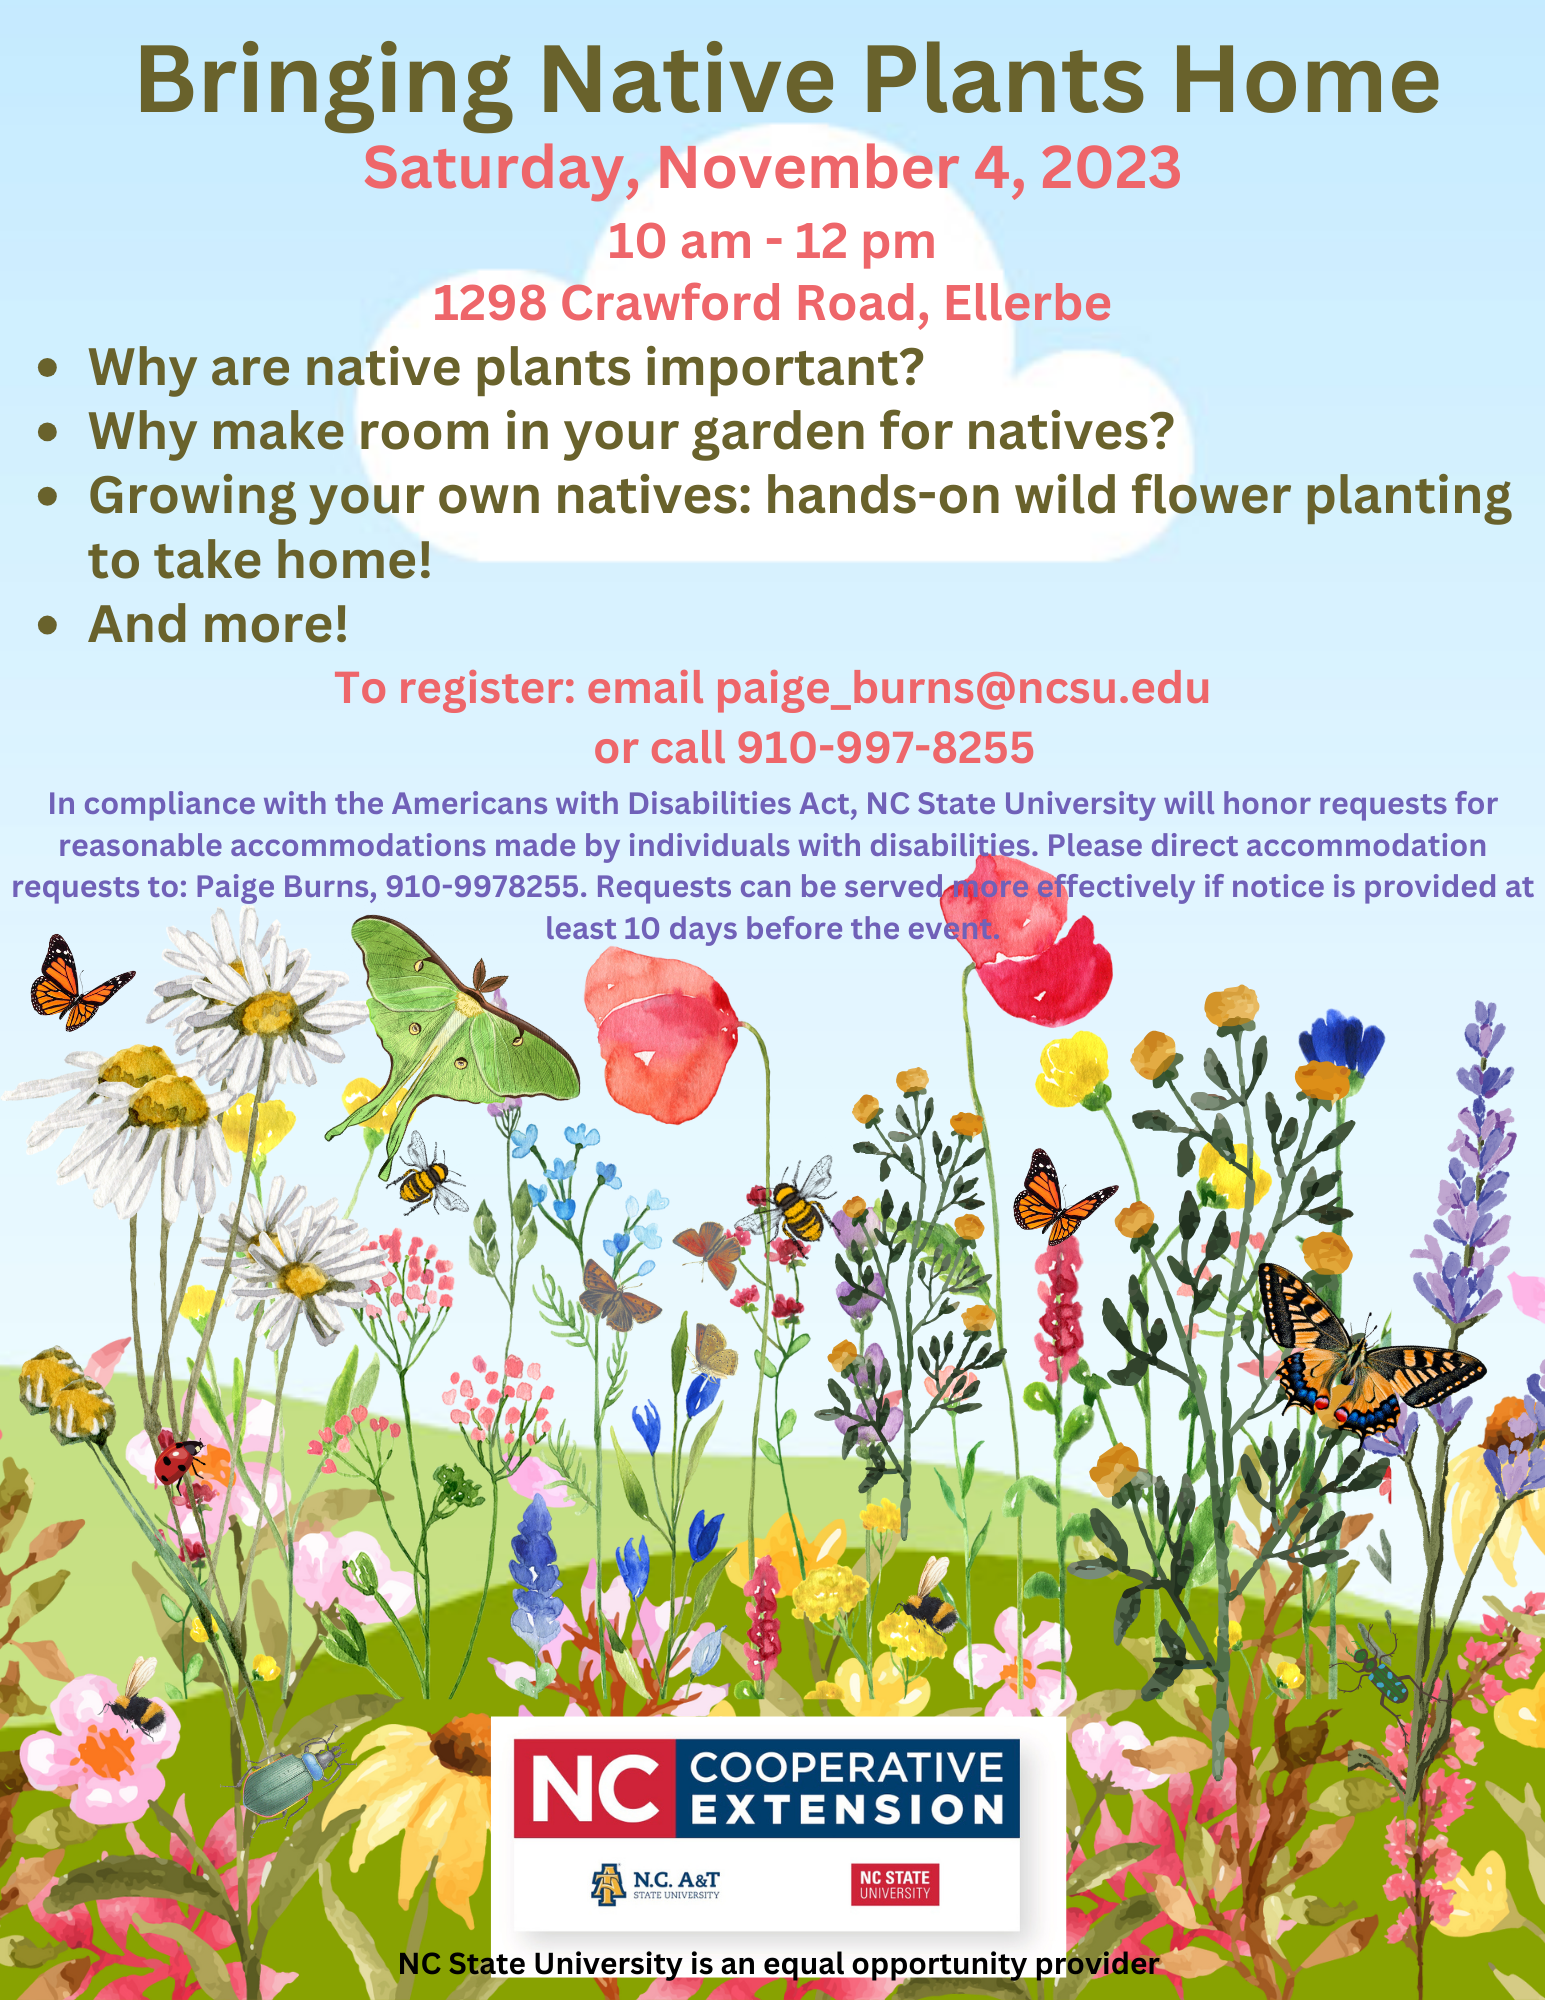 Flyer with information about Native Plant Workshop event